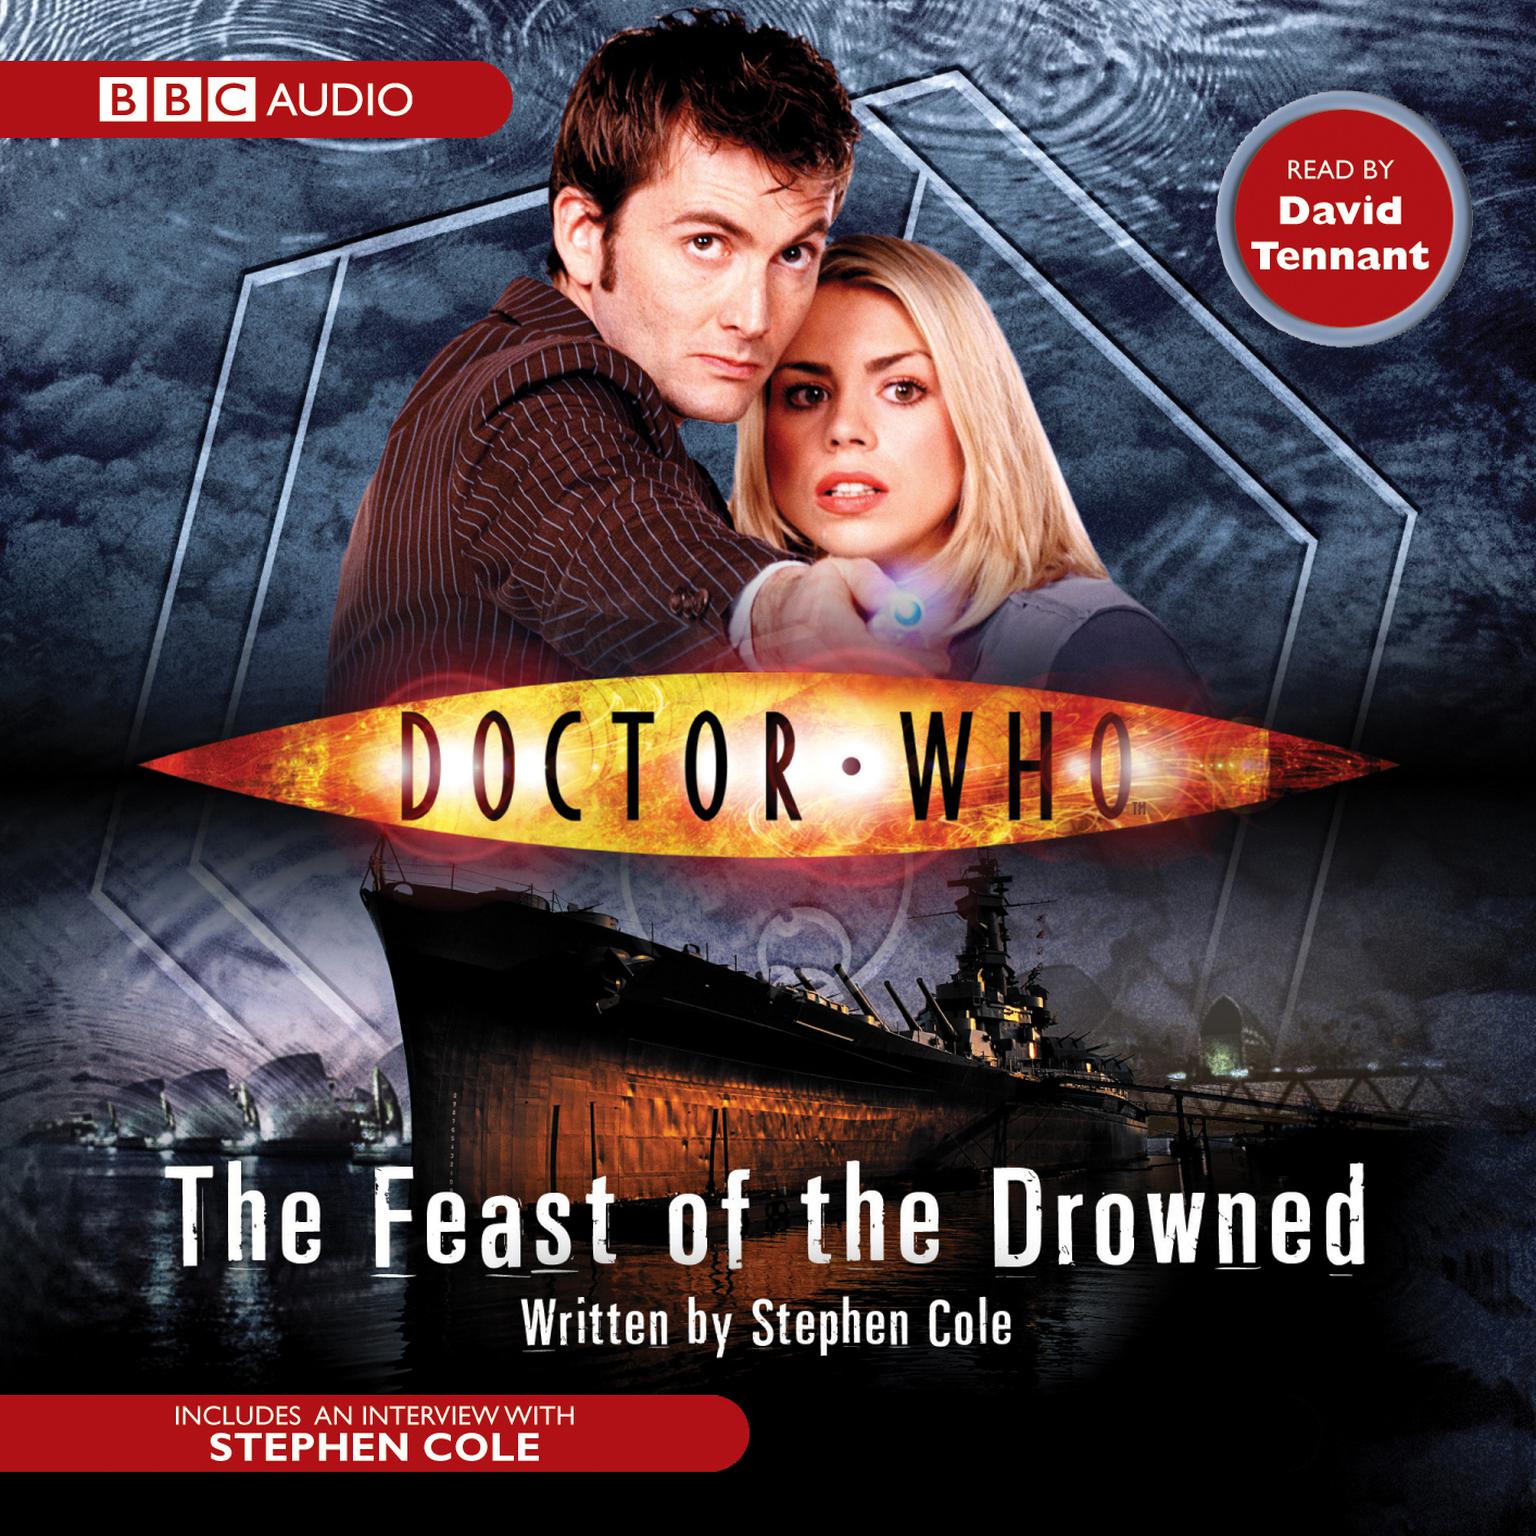 Doctor Who: The Feast of the Drowned (Abridged) Audiobook, by Stephen Cole